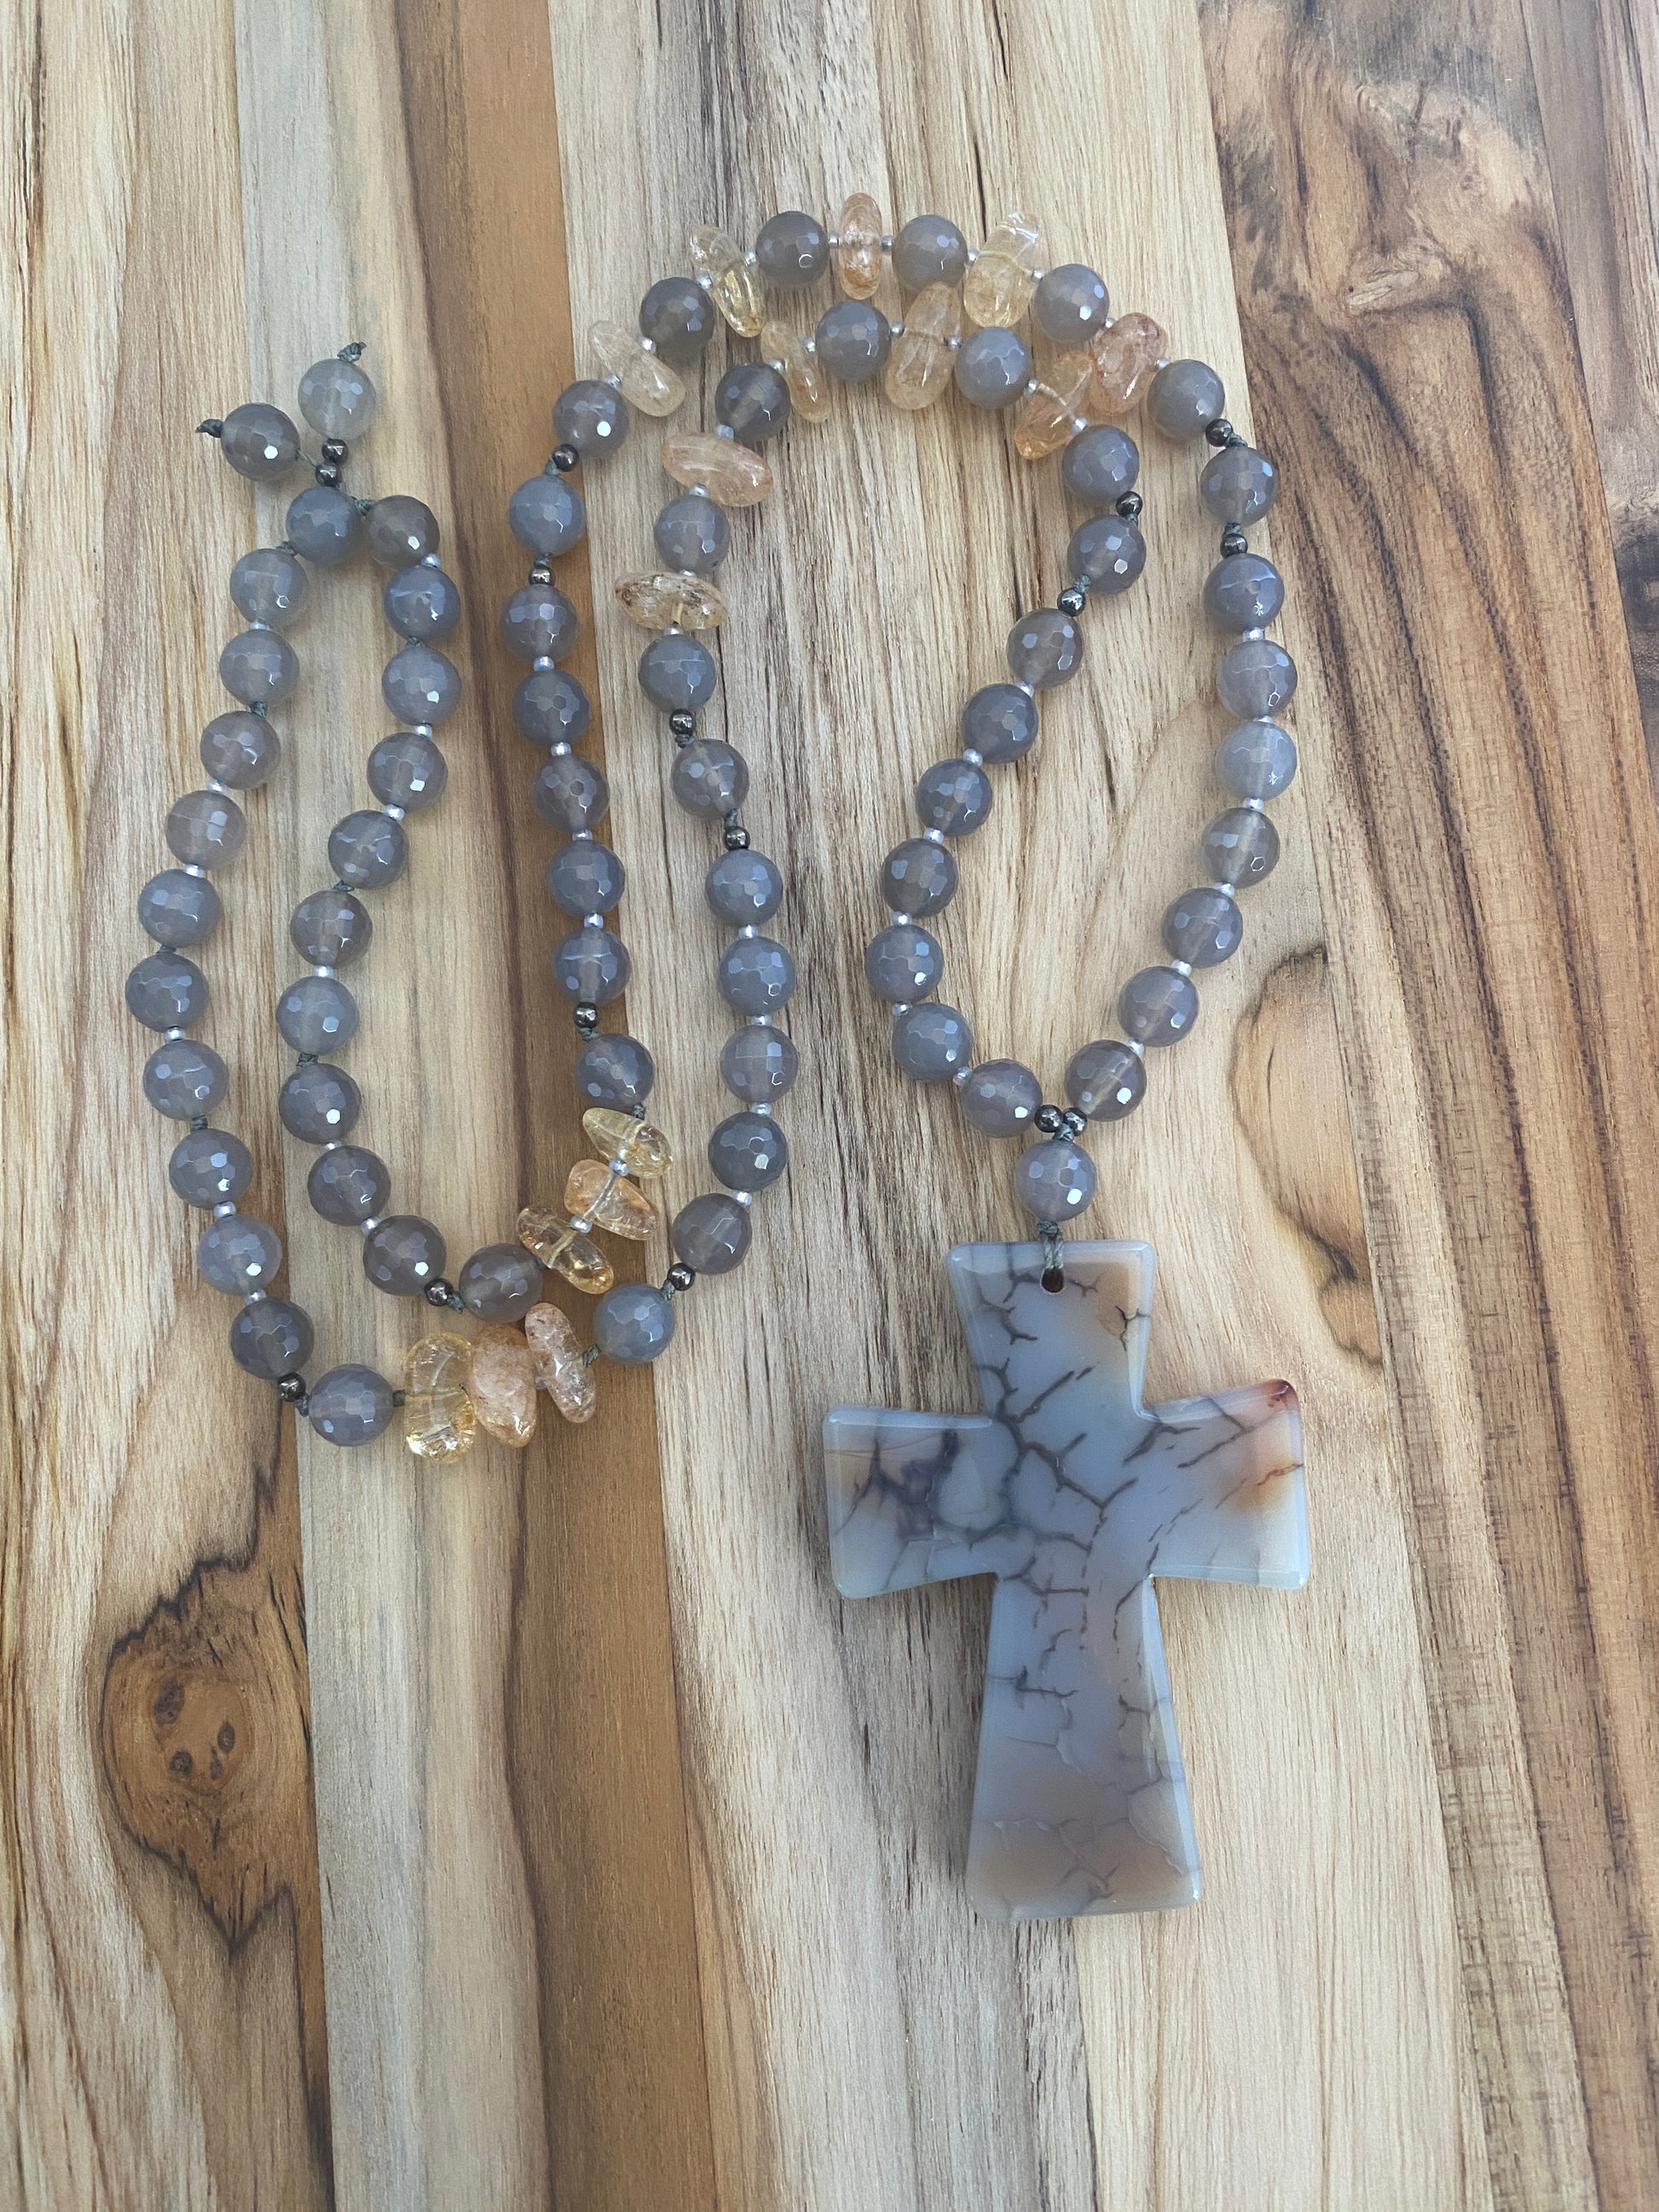 30" Long Grey Dragon Vein Agate Cross Pendant Necklace with Agate & Citrine Beads - My Urban Gems